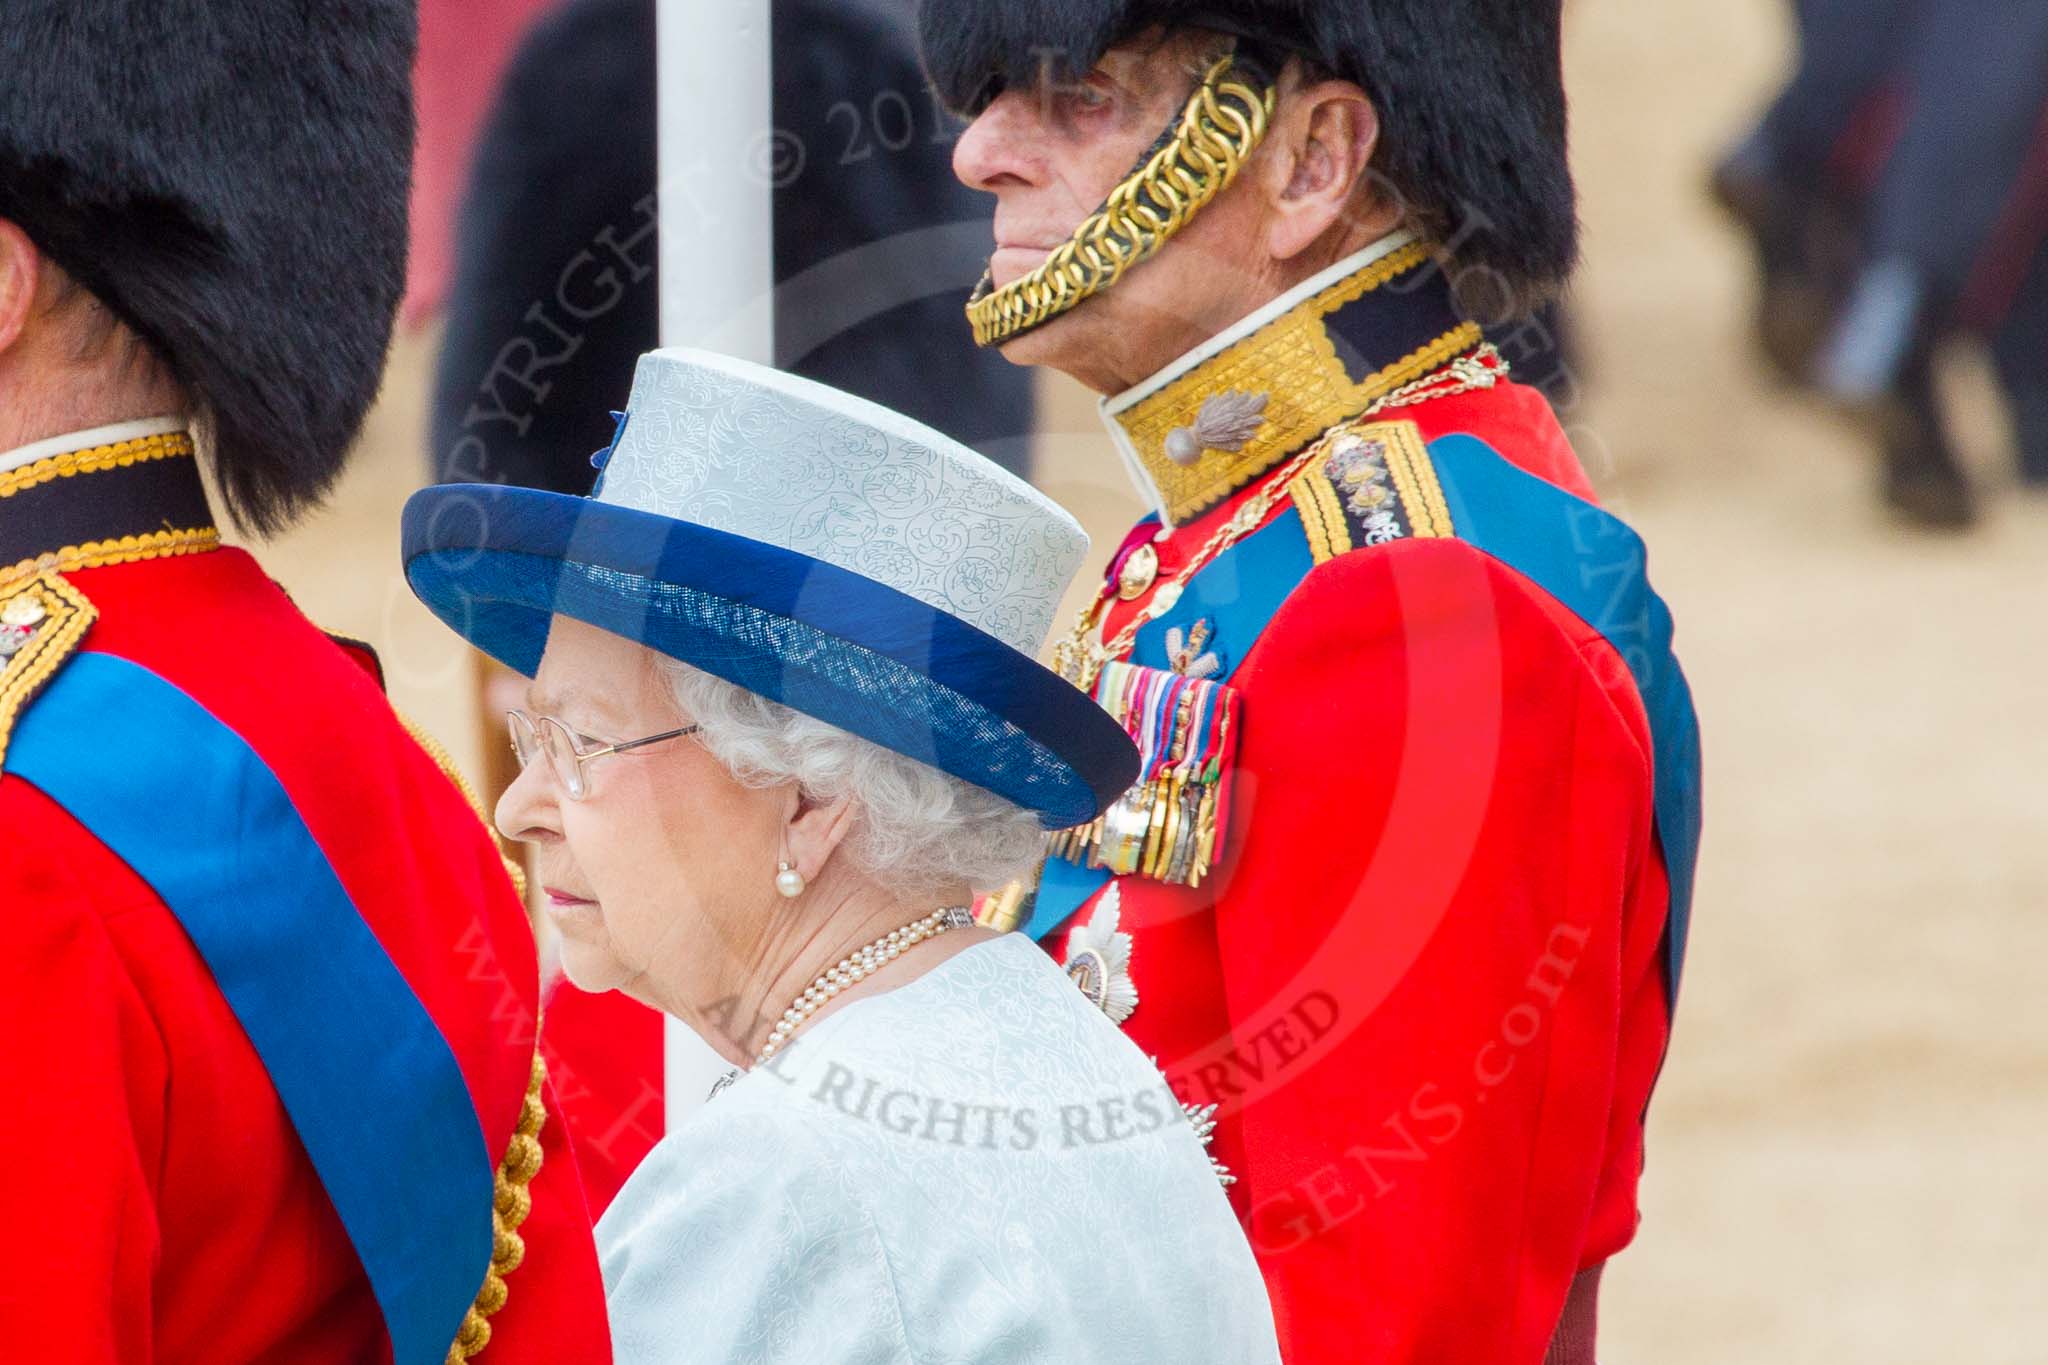 Trooping the Colour 2014.
Horse Guards Parade, Westminster,
London SW1A,

United Kingdom,
on 14 June 2014 at 11:39, image #646